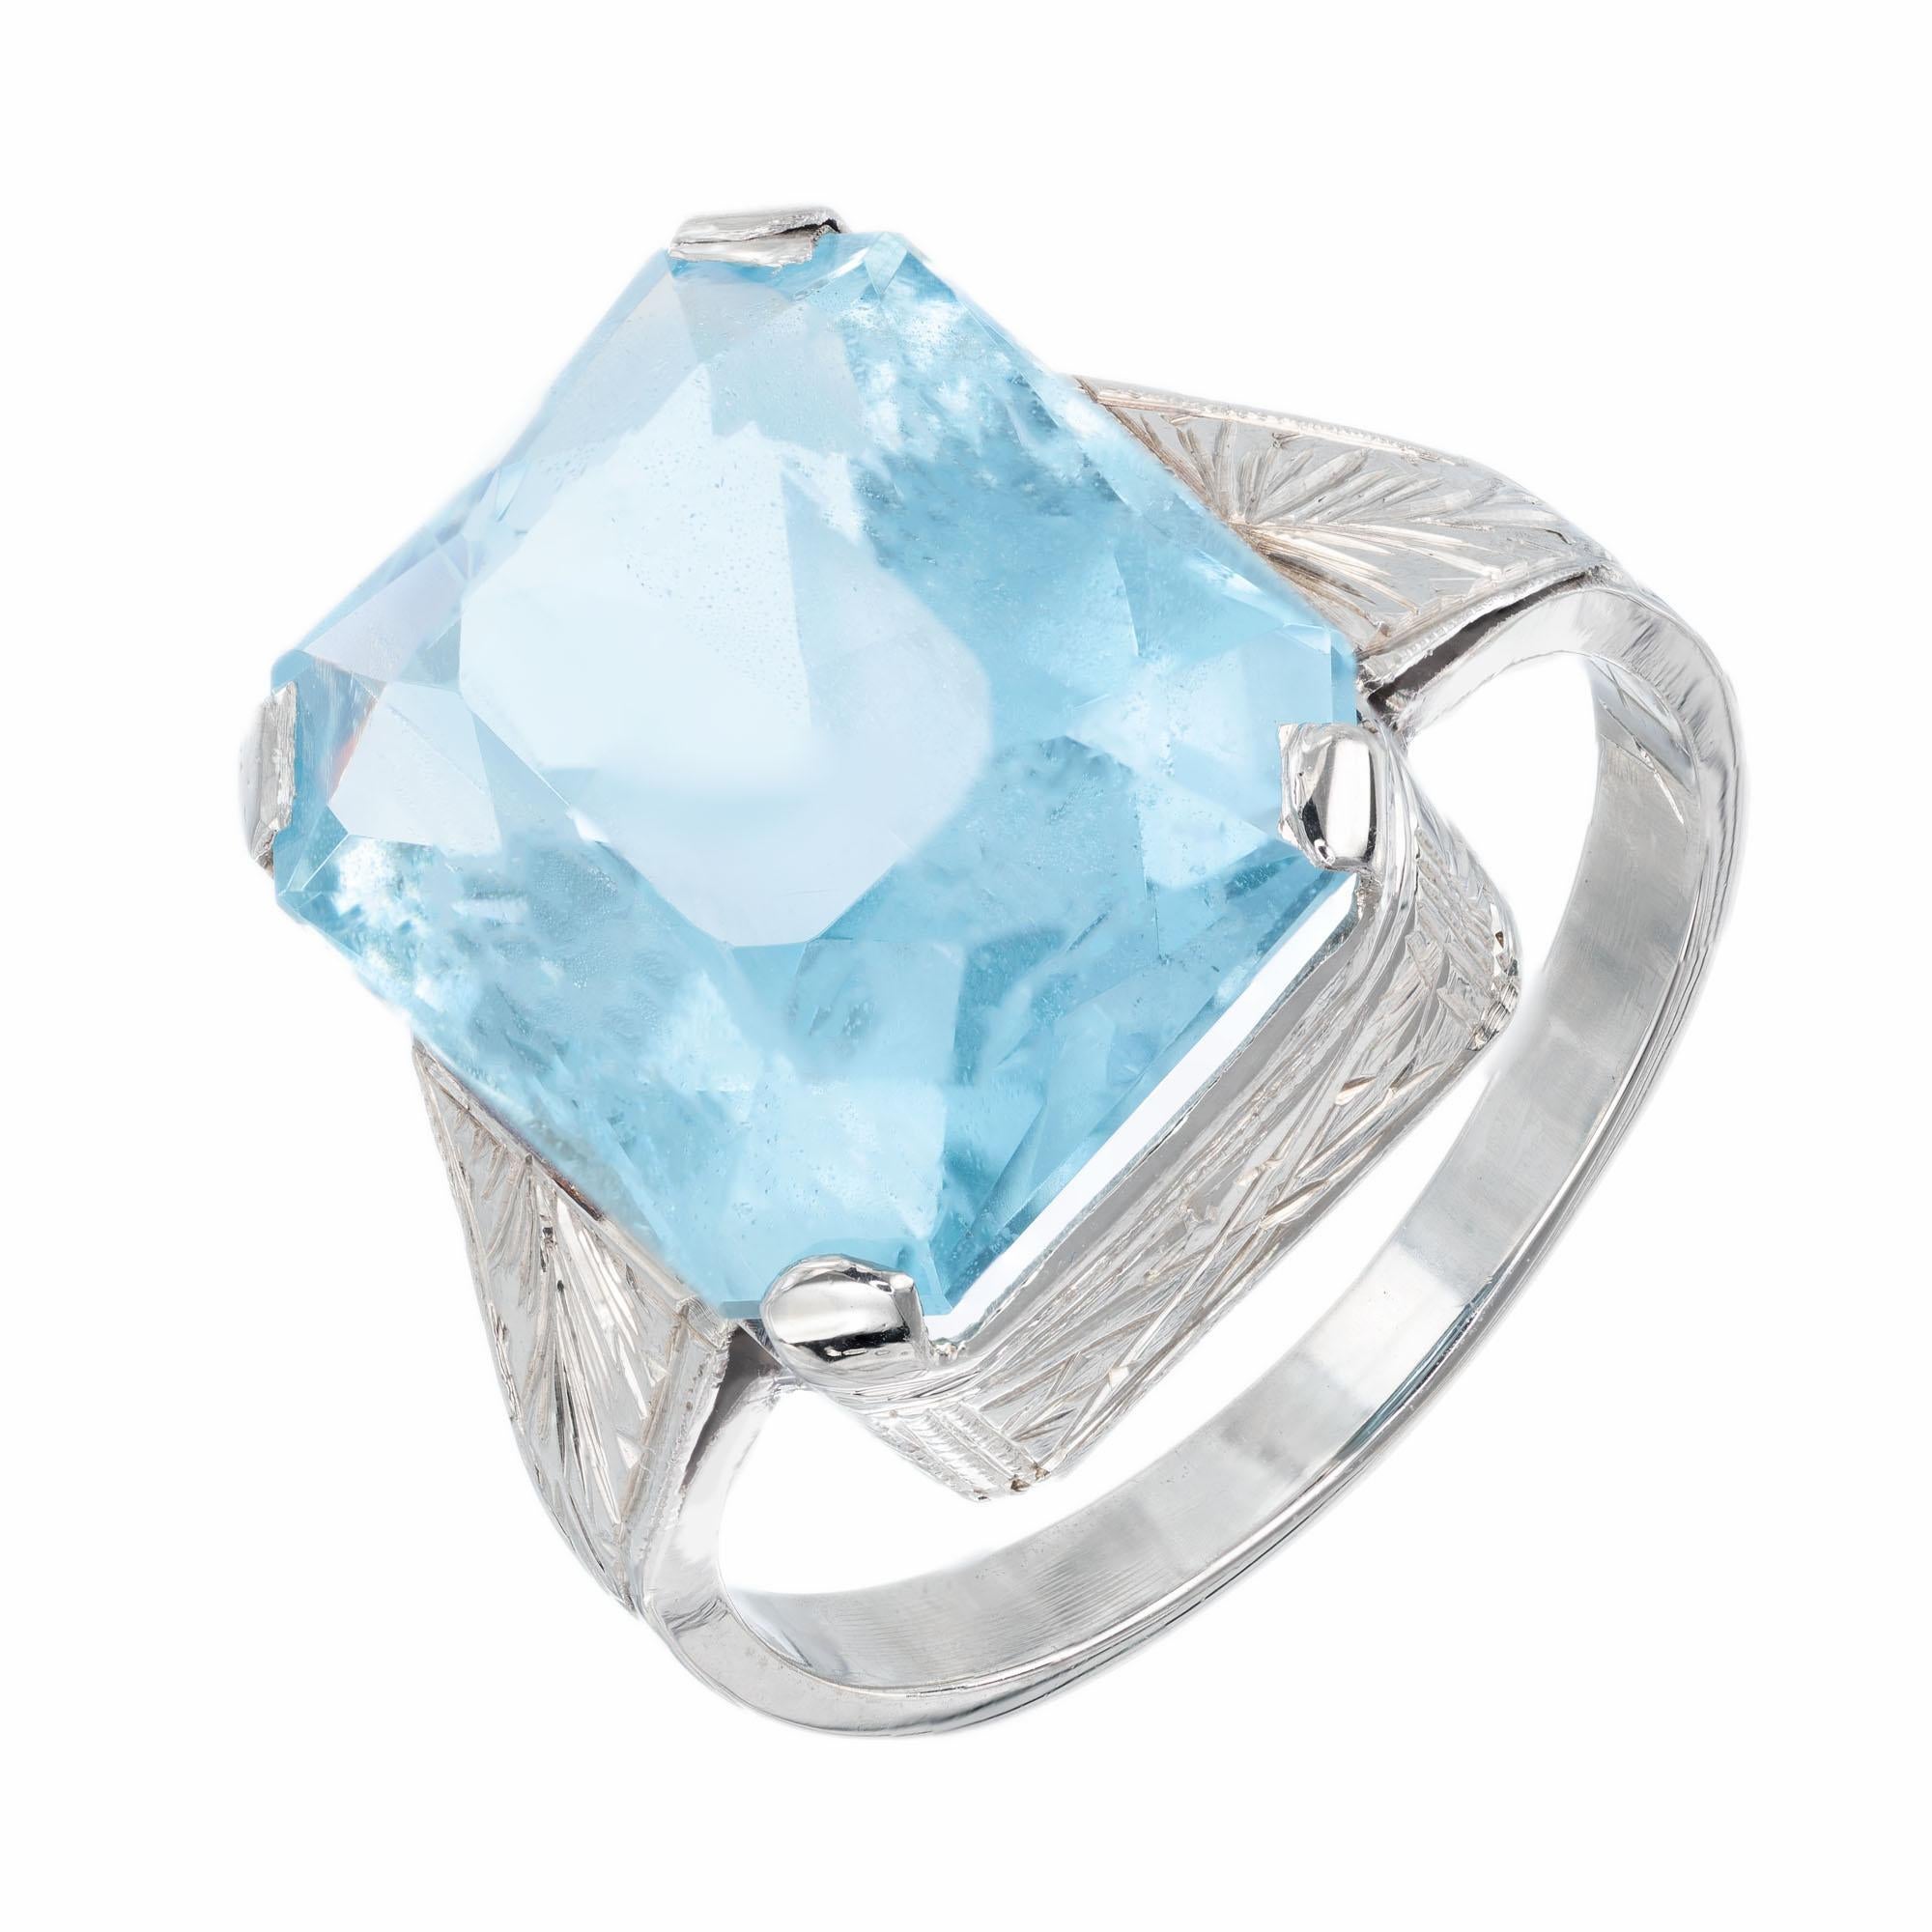 Circa 1920's Art Deco emerald cut aquamarine center stone in a 14k white gold handmade setting with hand engraved sides and shoulders. 

1 Emerald cut gem natural Aqua. approx. total weight 8.75cts, 14 x 11.9mm
Size 7 and sizable
14k White